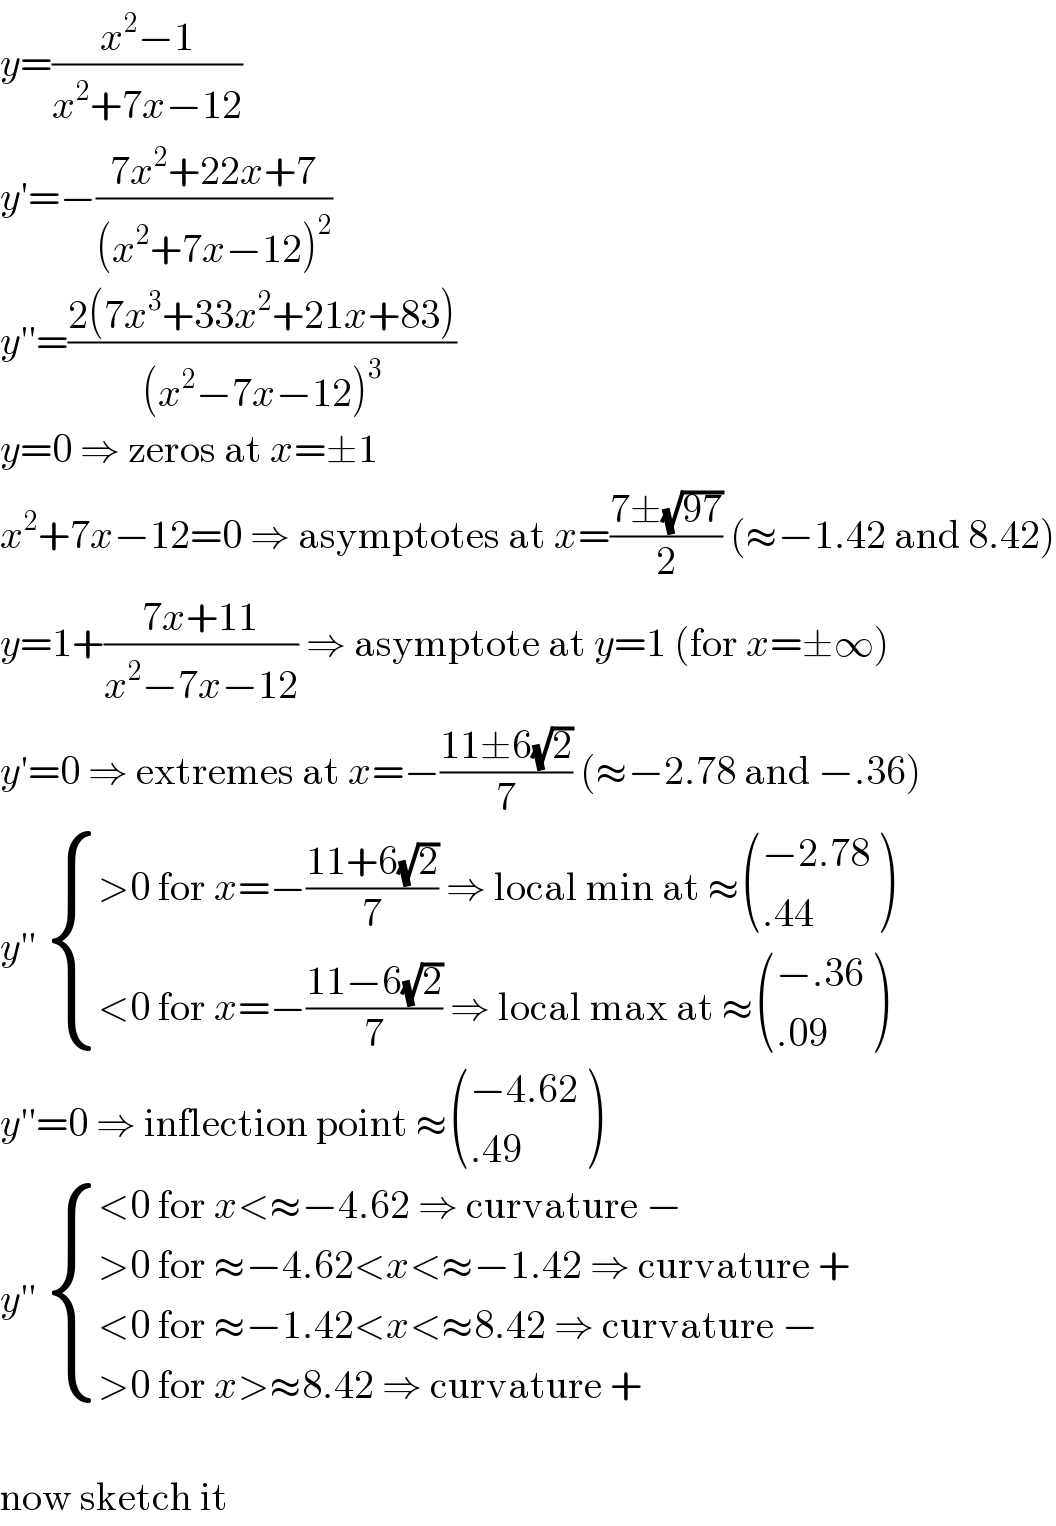 y=((x^2 −1)/(x^2 +7x−12))  y′=−((7x^2 +22x+7)/((x^2 +7x−12)^2 ))  y′′=((2(7x^3 +33x^2 +21x+83))/((x^2 −7x−12)^3 ))  y=0 ⇒ zeros at x=±1  x^2 +7x−12=0 ⇒ asymptotes at x=((7±(√(97)))/2) (≈−1.42 and 8.42)  y=1+((7x+11)/(x^2 −7x−12)) ⇒ asymptote at y=1 (for x=±∞)  y′=0 ⇒ extremes at x=−((11±6(√2))/7) (≈−2.78 and −.36)  y′′  { ((>0 for x=−((11+6(√2))/7) ⇒ local min at ≈ (((−2.78)),((.44)) ))),((<0 for x=−((11−6(√2))/7) ⇒ local max at ≈ (((−.36)),((.09)) ))) :}  y′′=0 ⇒ inflection point ≈ (((−4.62)),((.49)) )  y′′  { ((<0 for x<≈−4.62 ⇒ curvature −)),((>0 for ≈−4.62<x<≈−1.42 ⇒ curvature +)),((<0 for ≈−1.42<x<≈8.42 ⇒ curvature −)),((>0 for x>≈8.42 ⇒ curvature + )) :}    now sketch it  